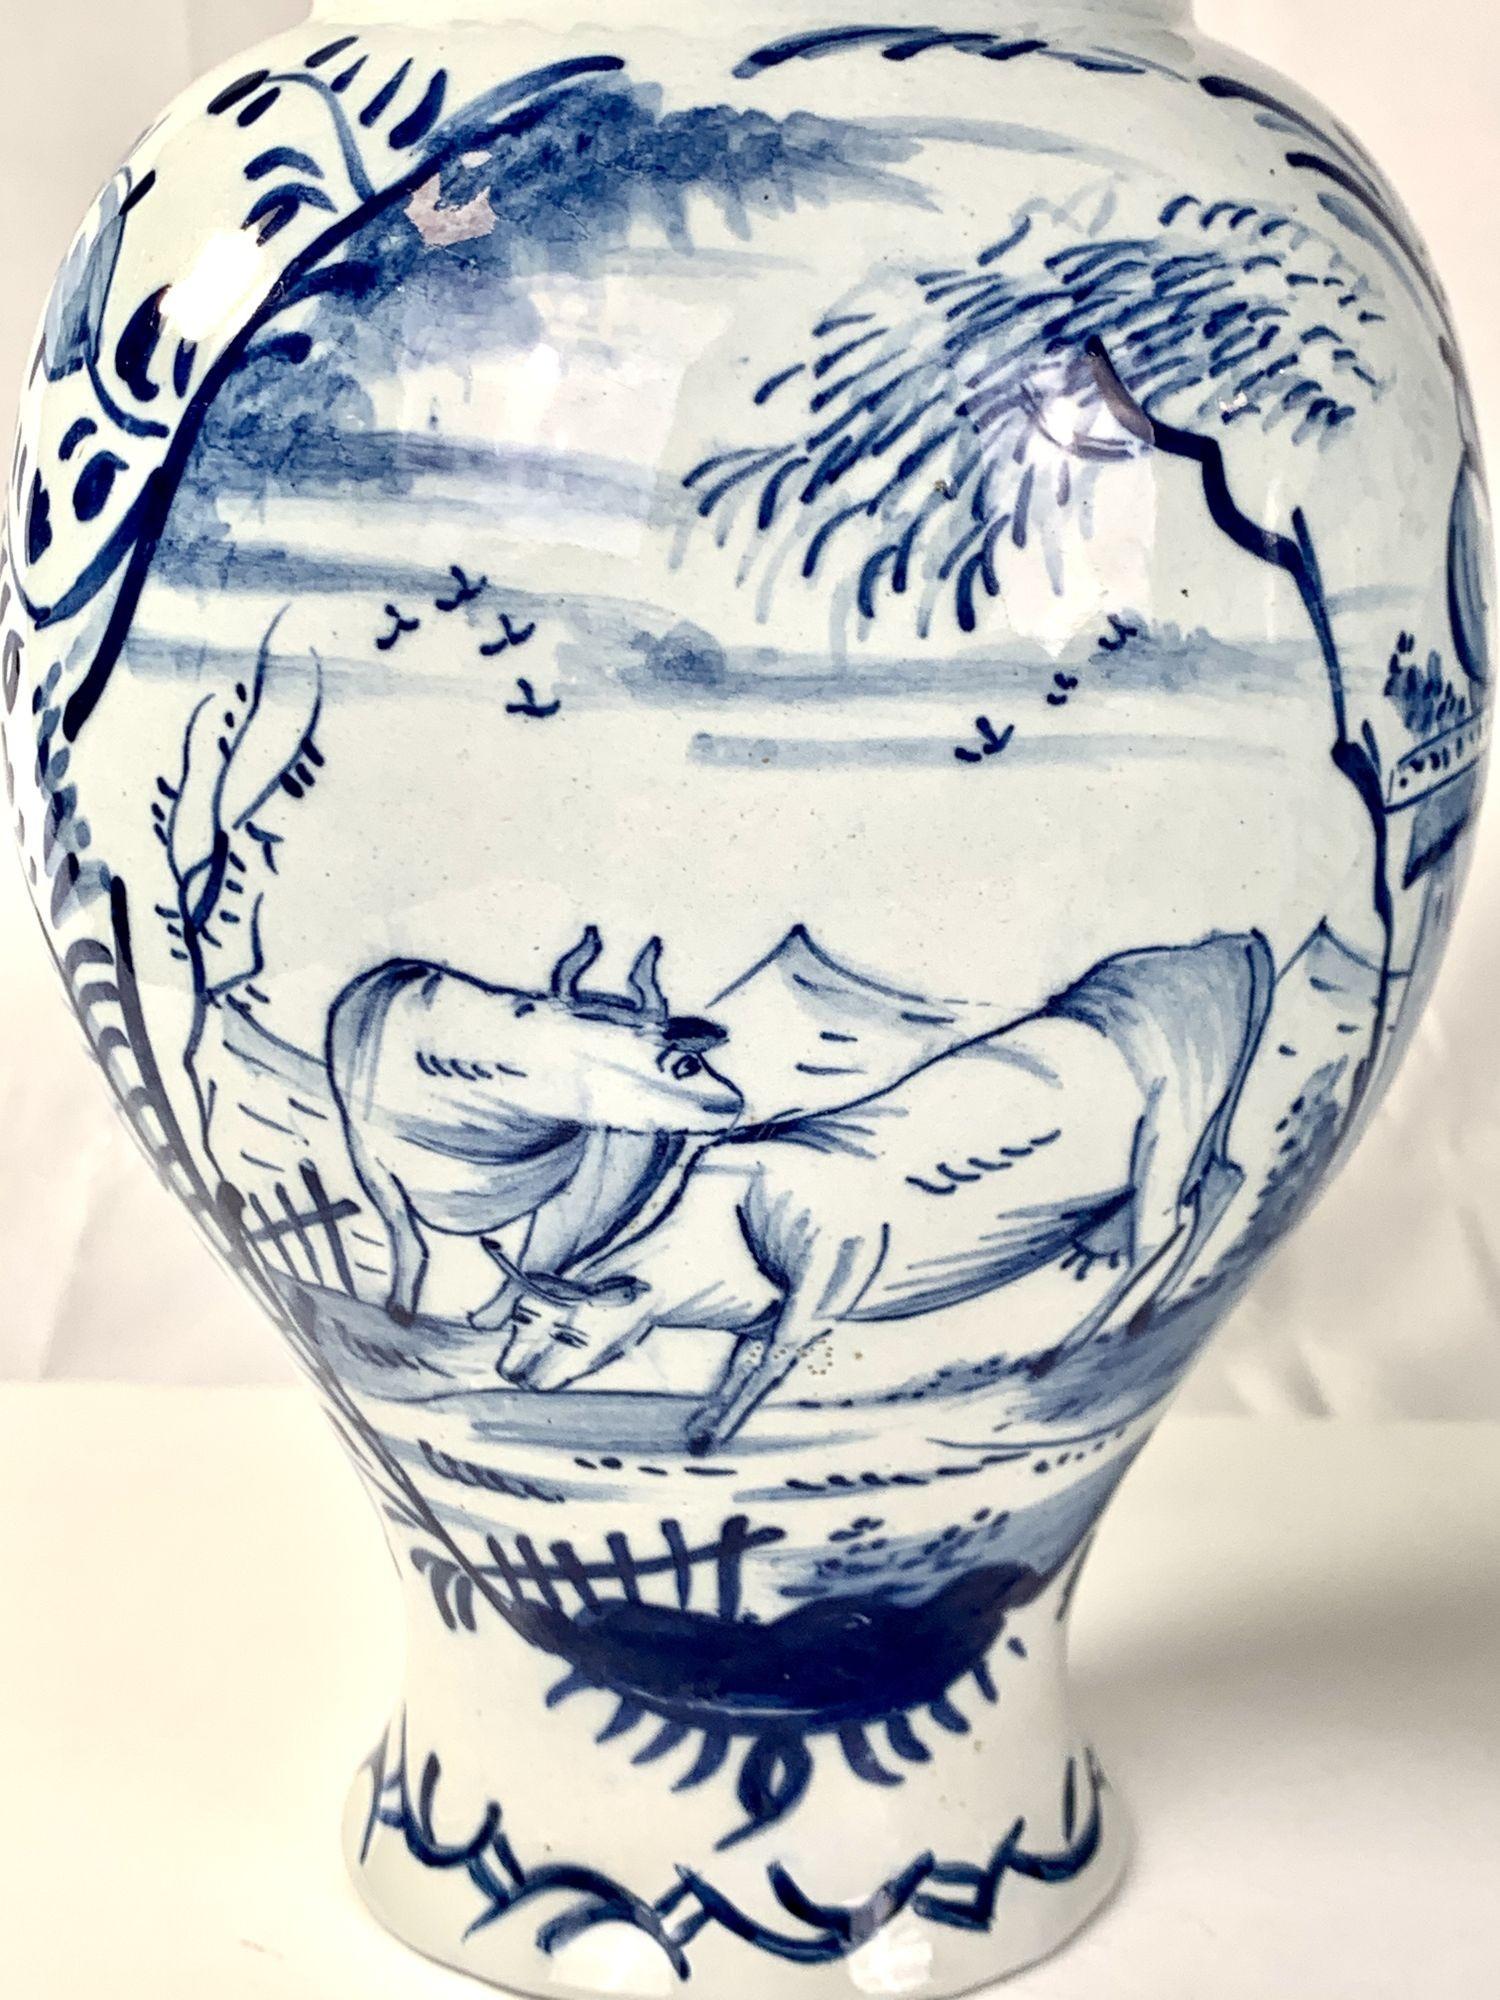 This pair of Dutch Delft mantle jars show a delightful rococo scene hand-painted on blue and white Delft.
We see a pair of cows resting in a fenced area with a flock of birds in the sky and in the background fields and mountains.
 The finial on the